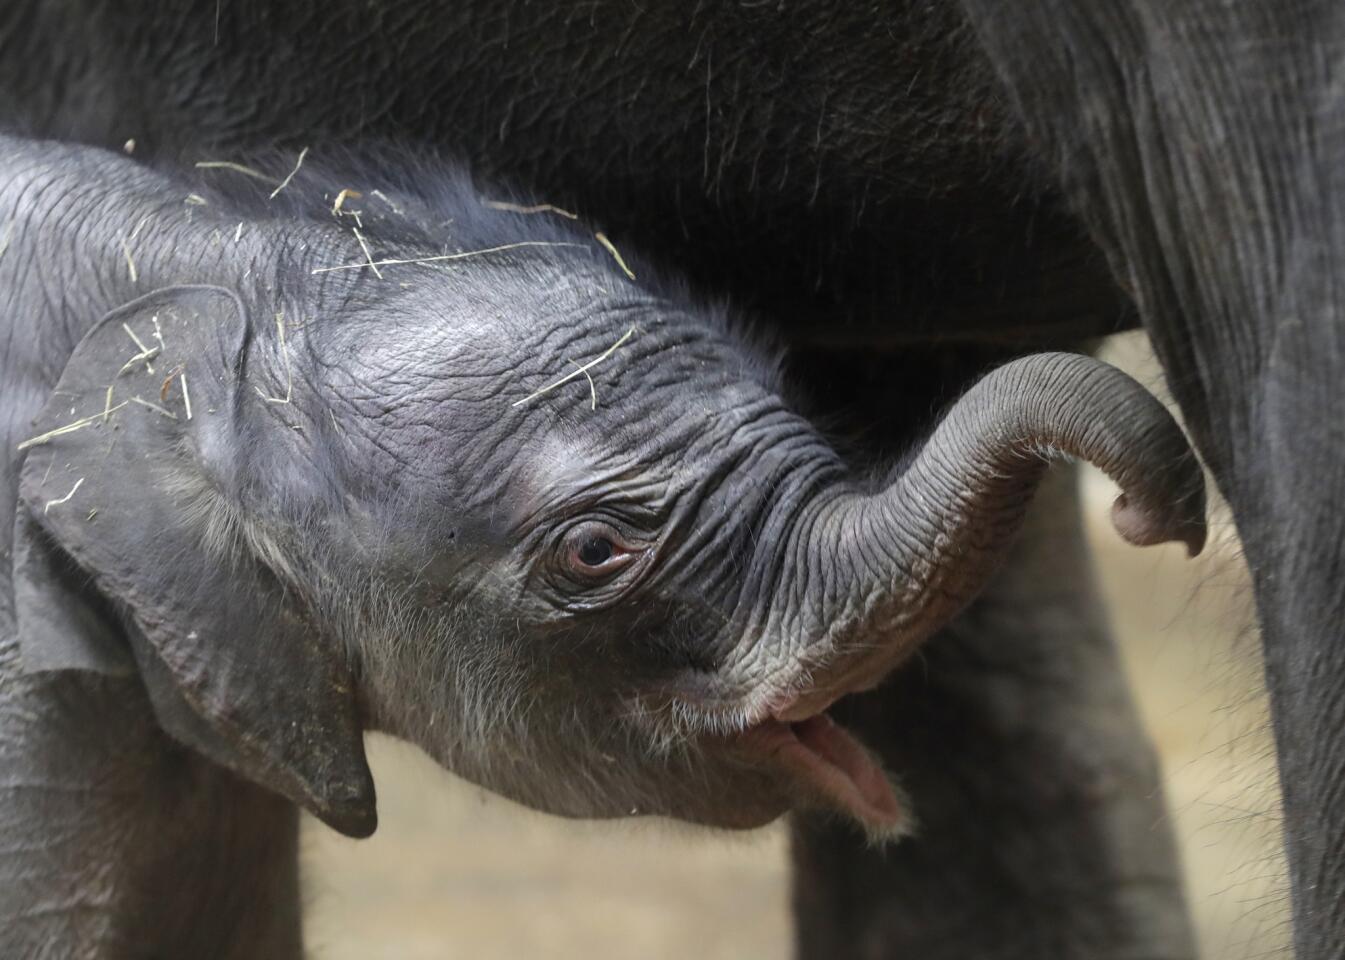 A newborn Asian elephant baby stands next to its mother Tamara in their enclosure at the zoo in Prague, Czech Republic, on Oct. 8, 2016. The mother Tamara gave birth to the male calf on Oct. 5. It doesn't have a name yet.